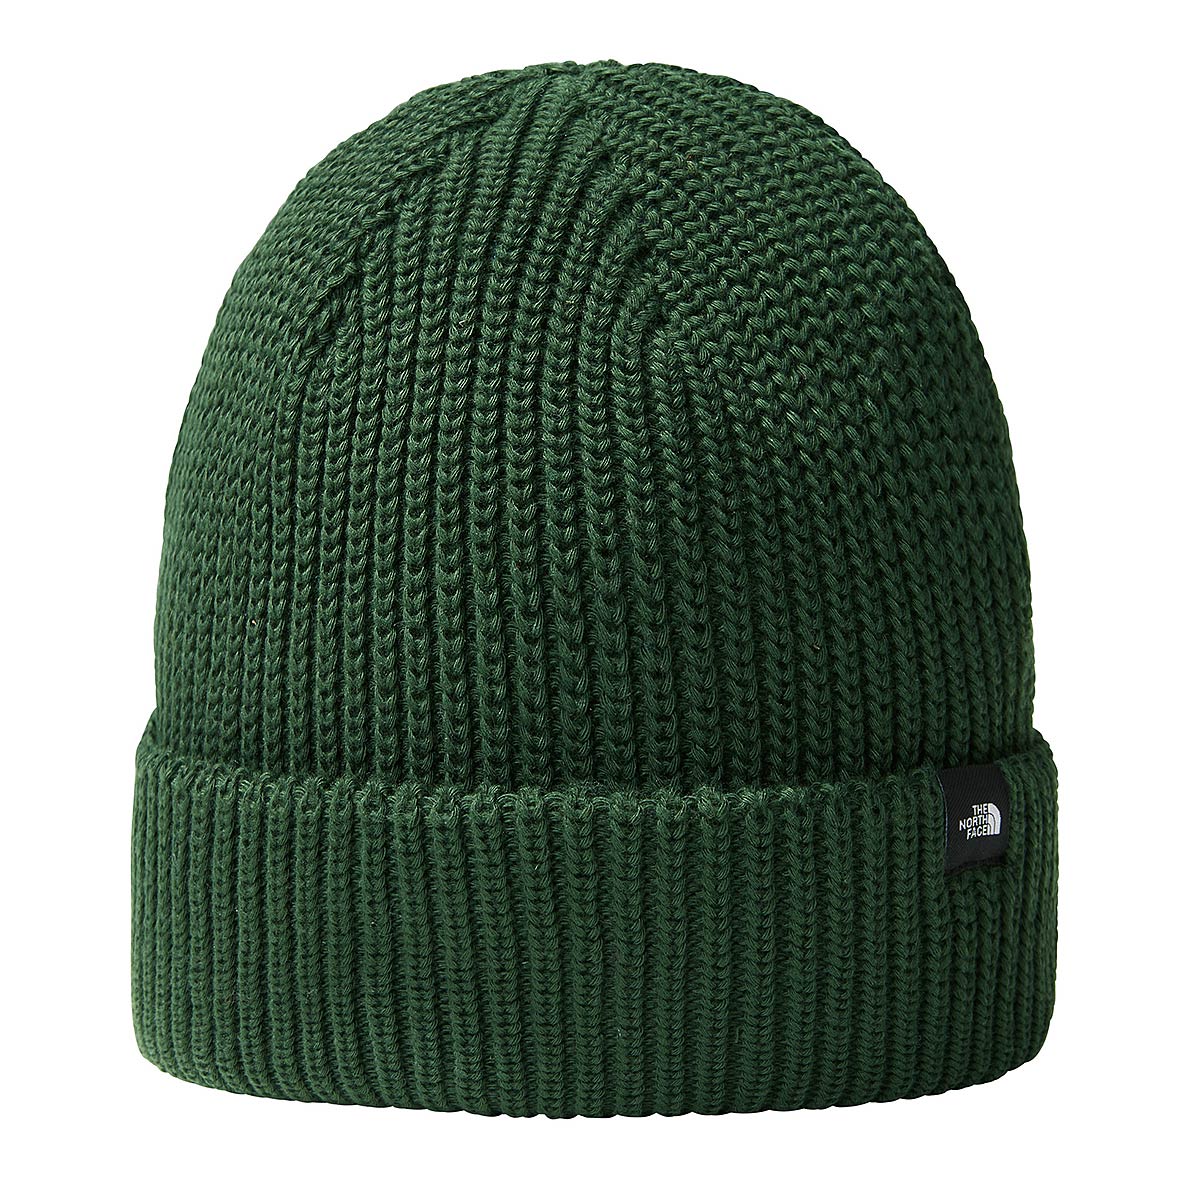 Image of The North Face Tnf Fisherman Beanie, Pine Needle